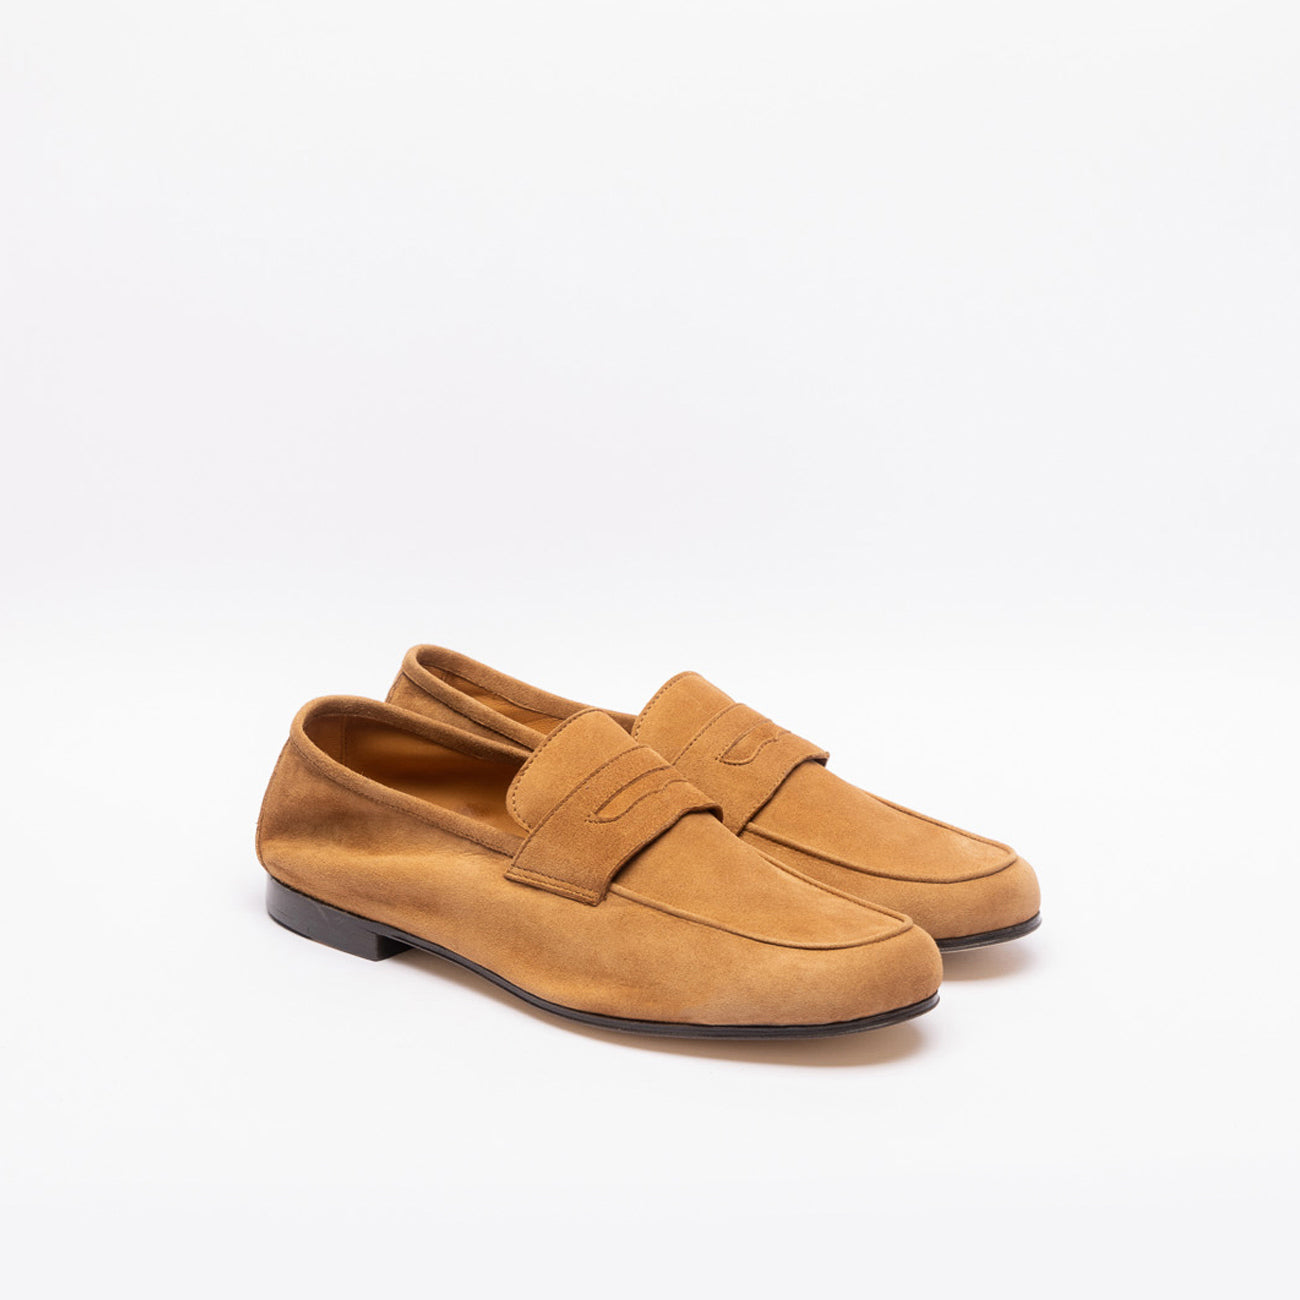 Borghini unlined cognac suede penny loafer